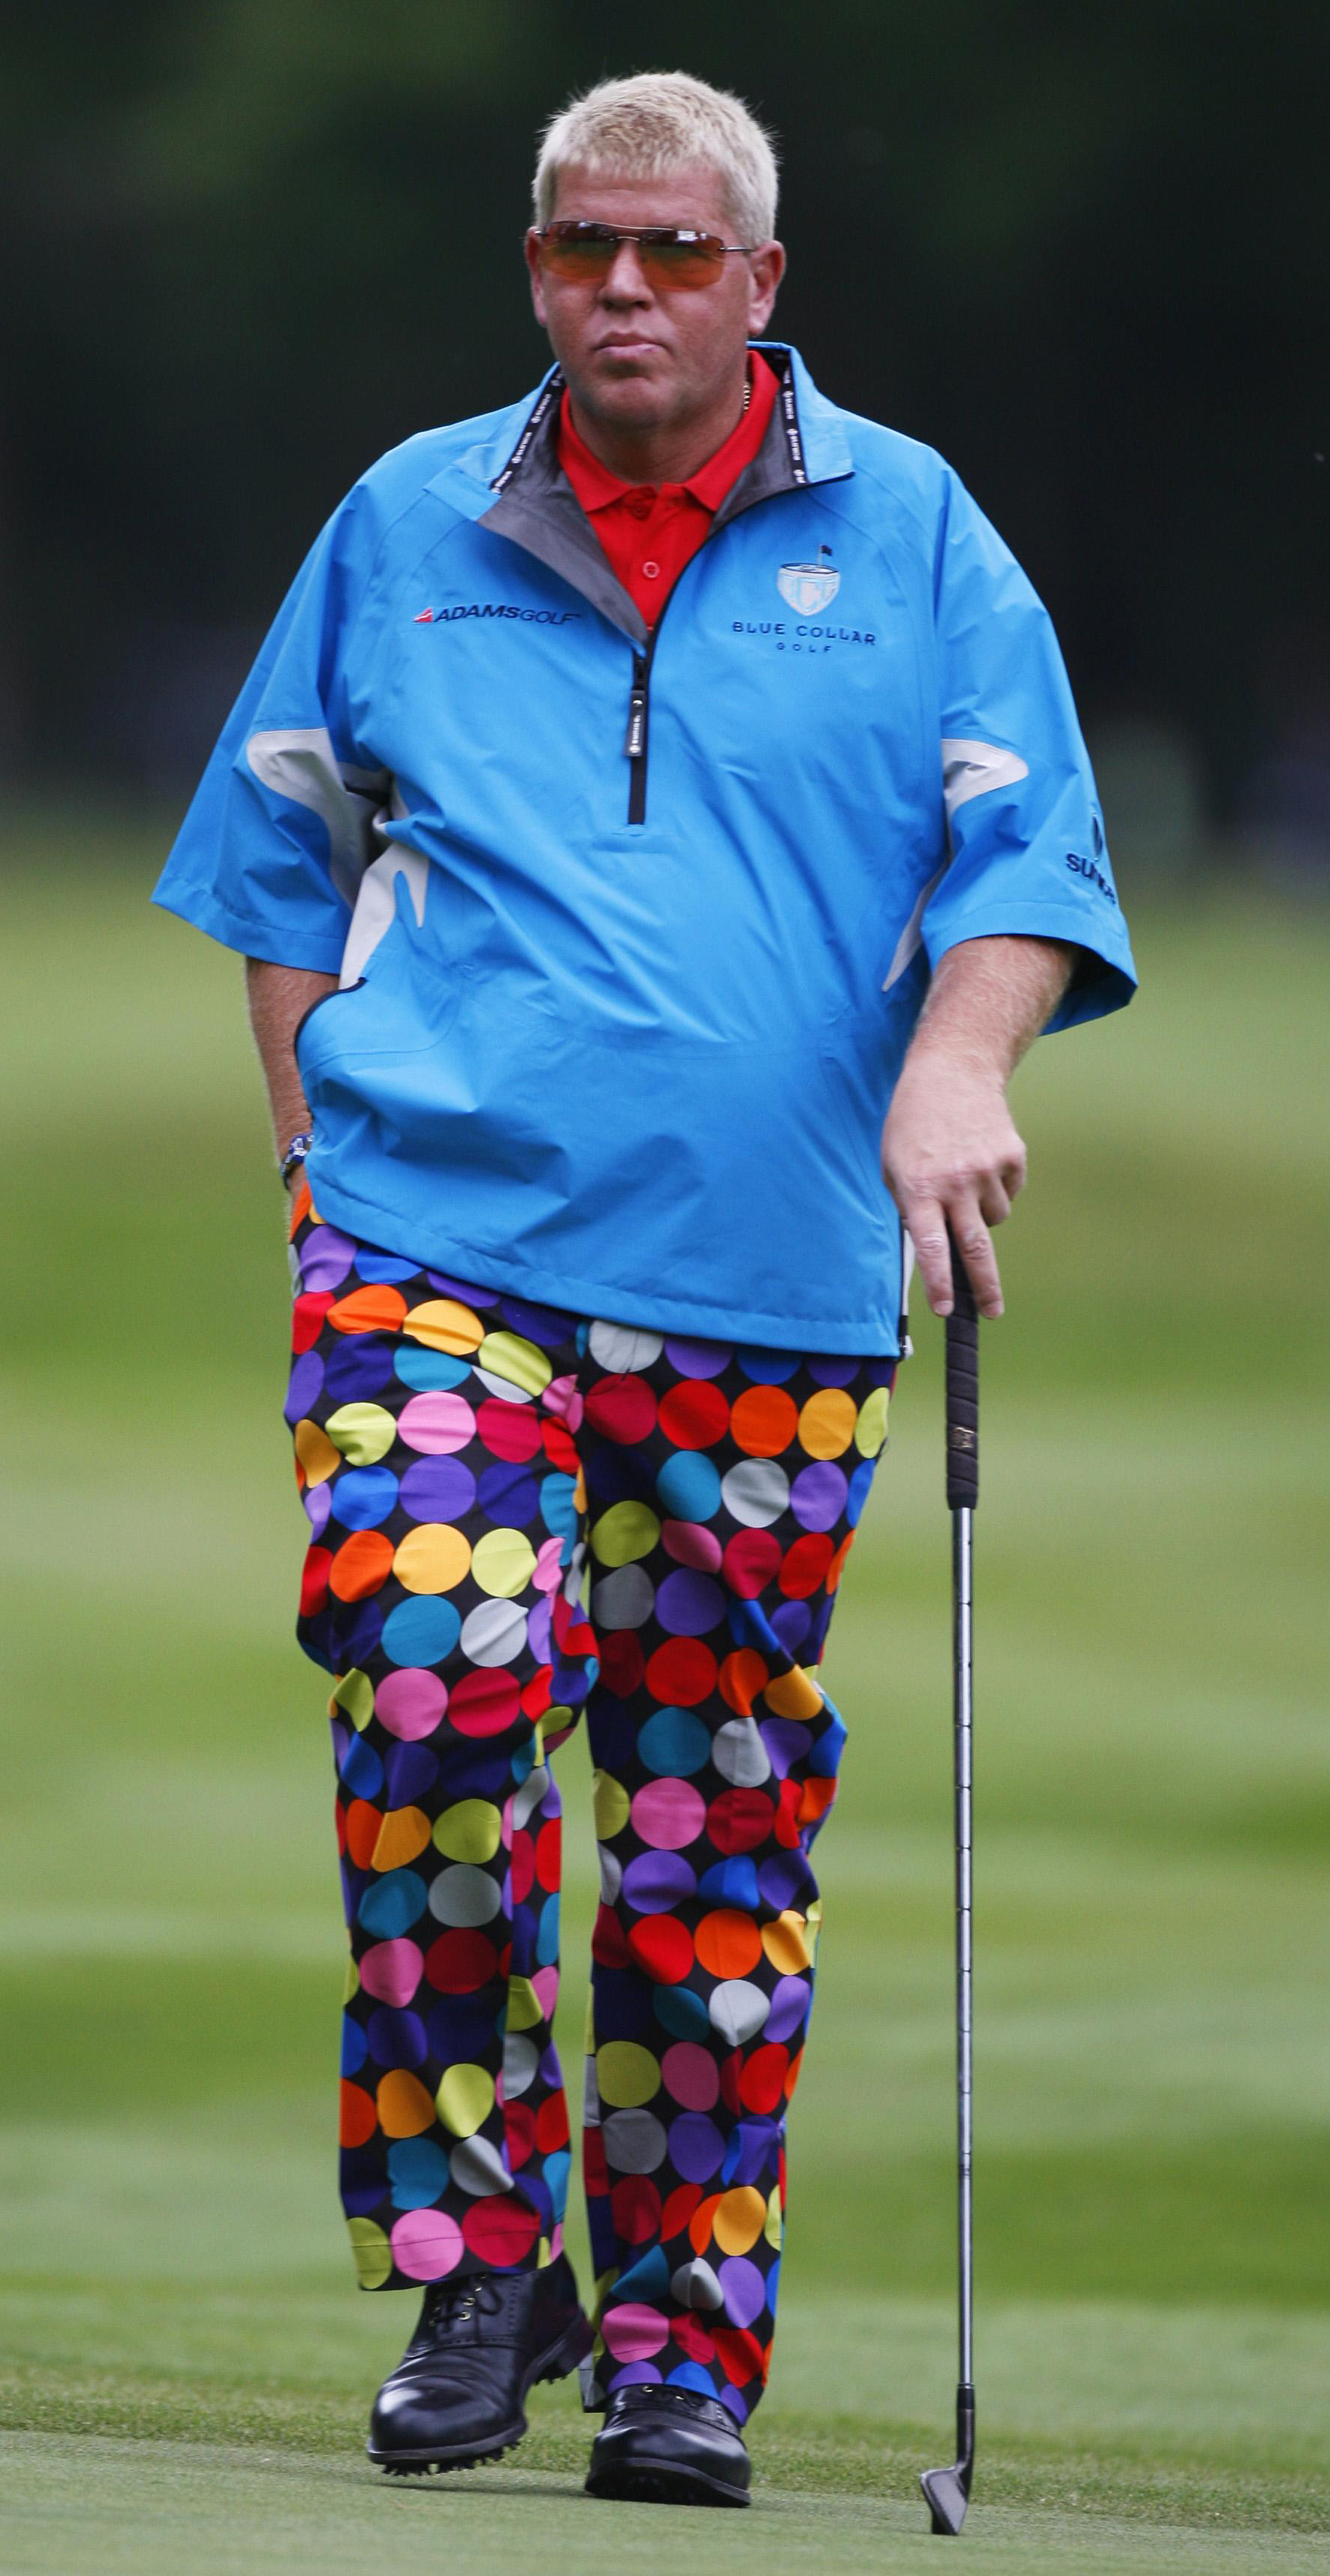 Daly in Loudmouth trousers